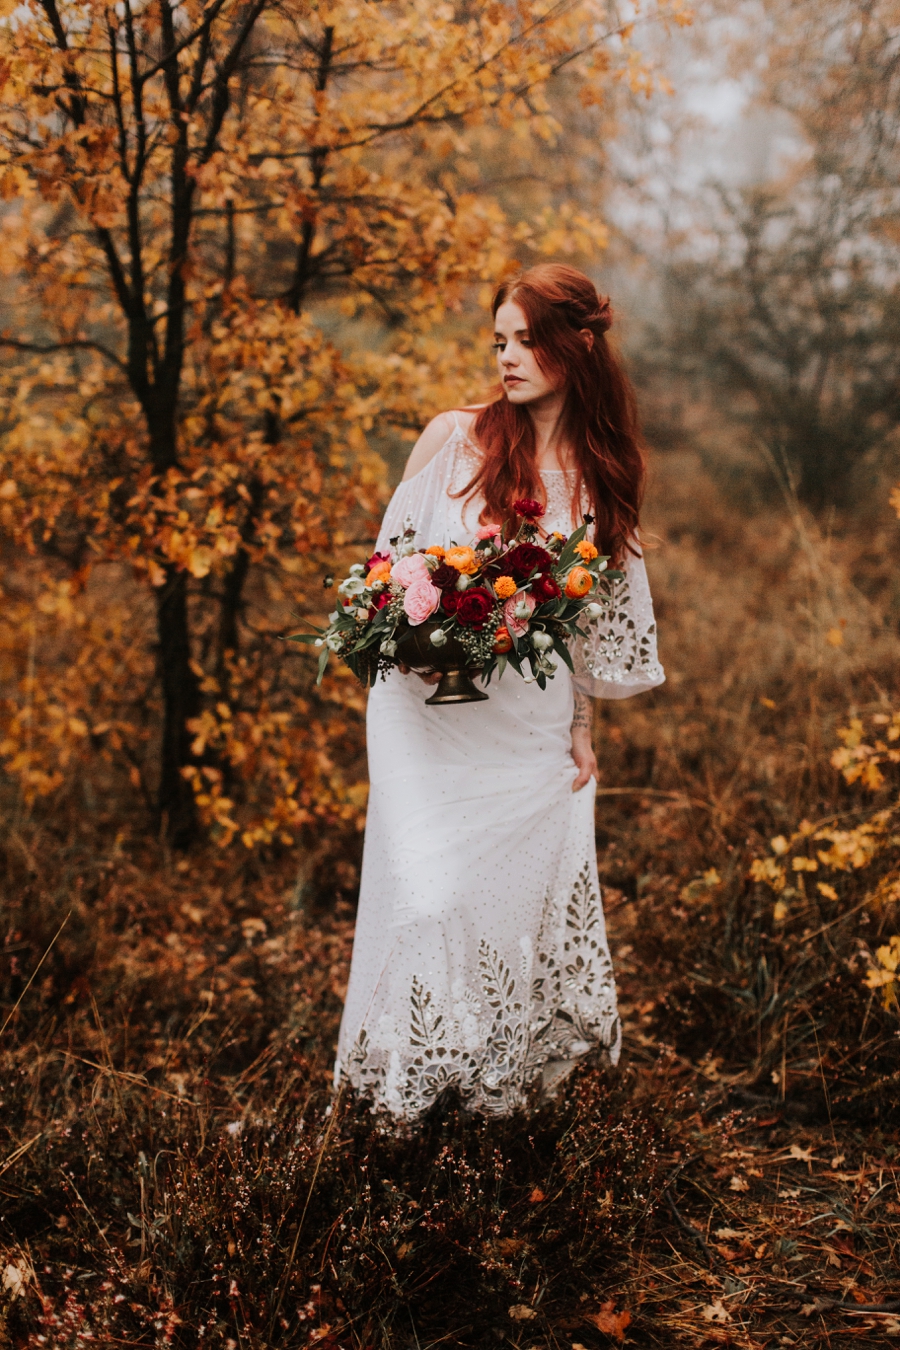 rue de siene wedding dress in the forest, yellow fall leaves bride and groom